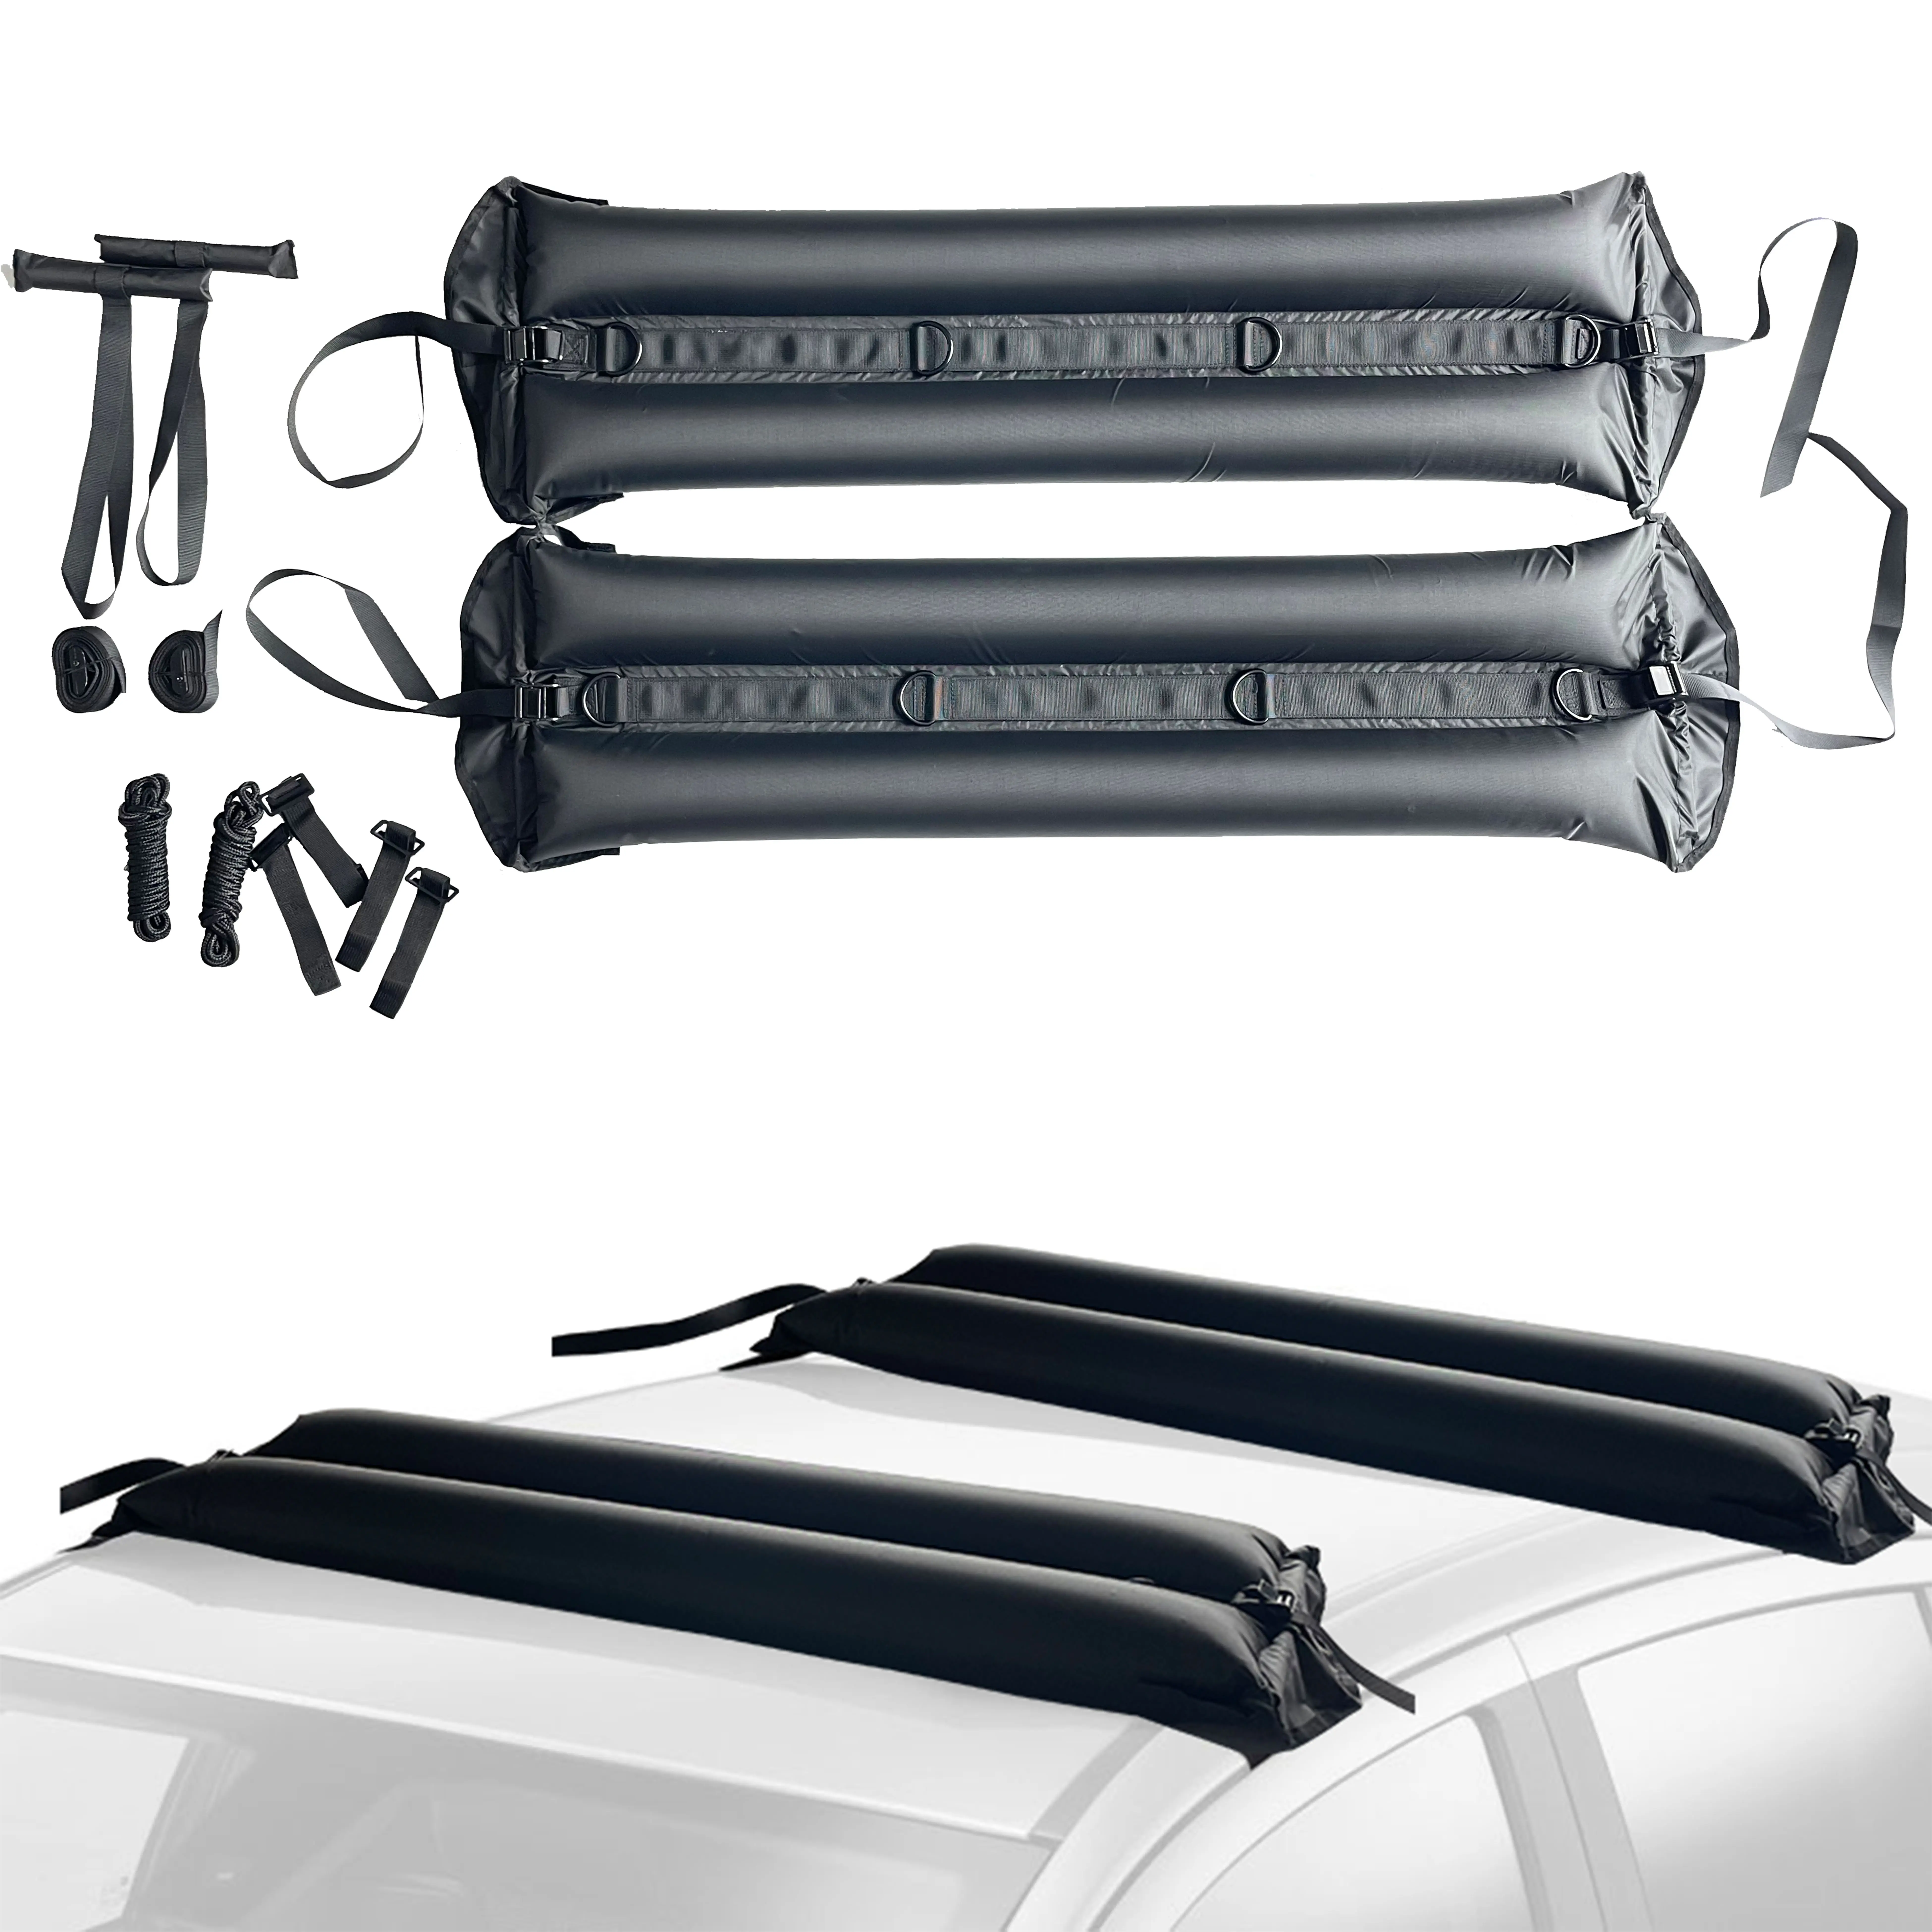 Handirack universal inflatable soft roof top rack and luggage carrier for kayaks, canoes, surfboards and SUPs